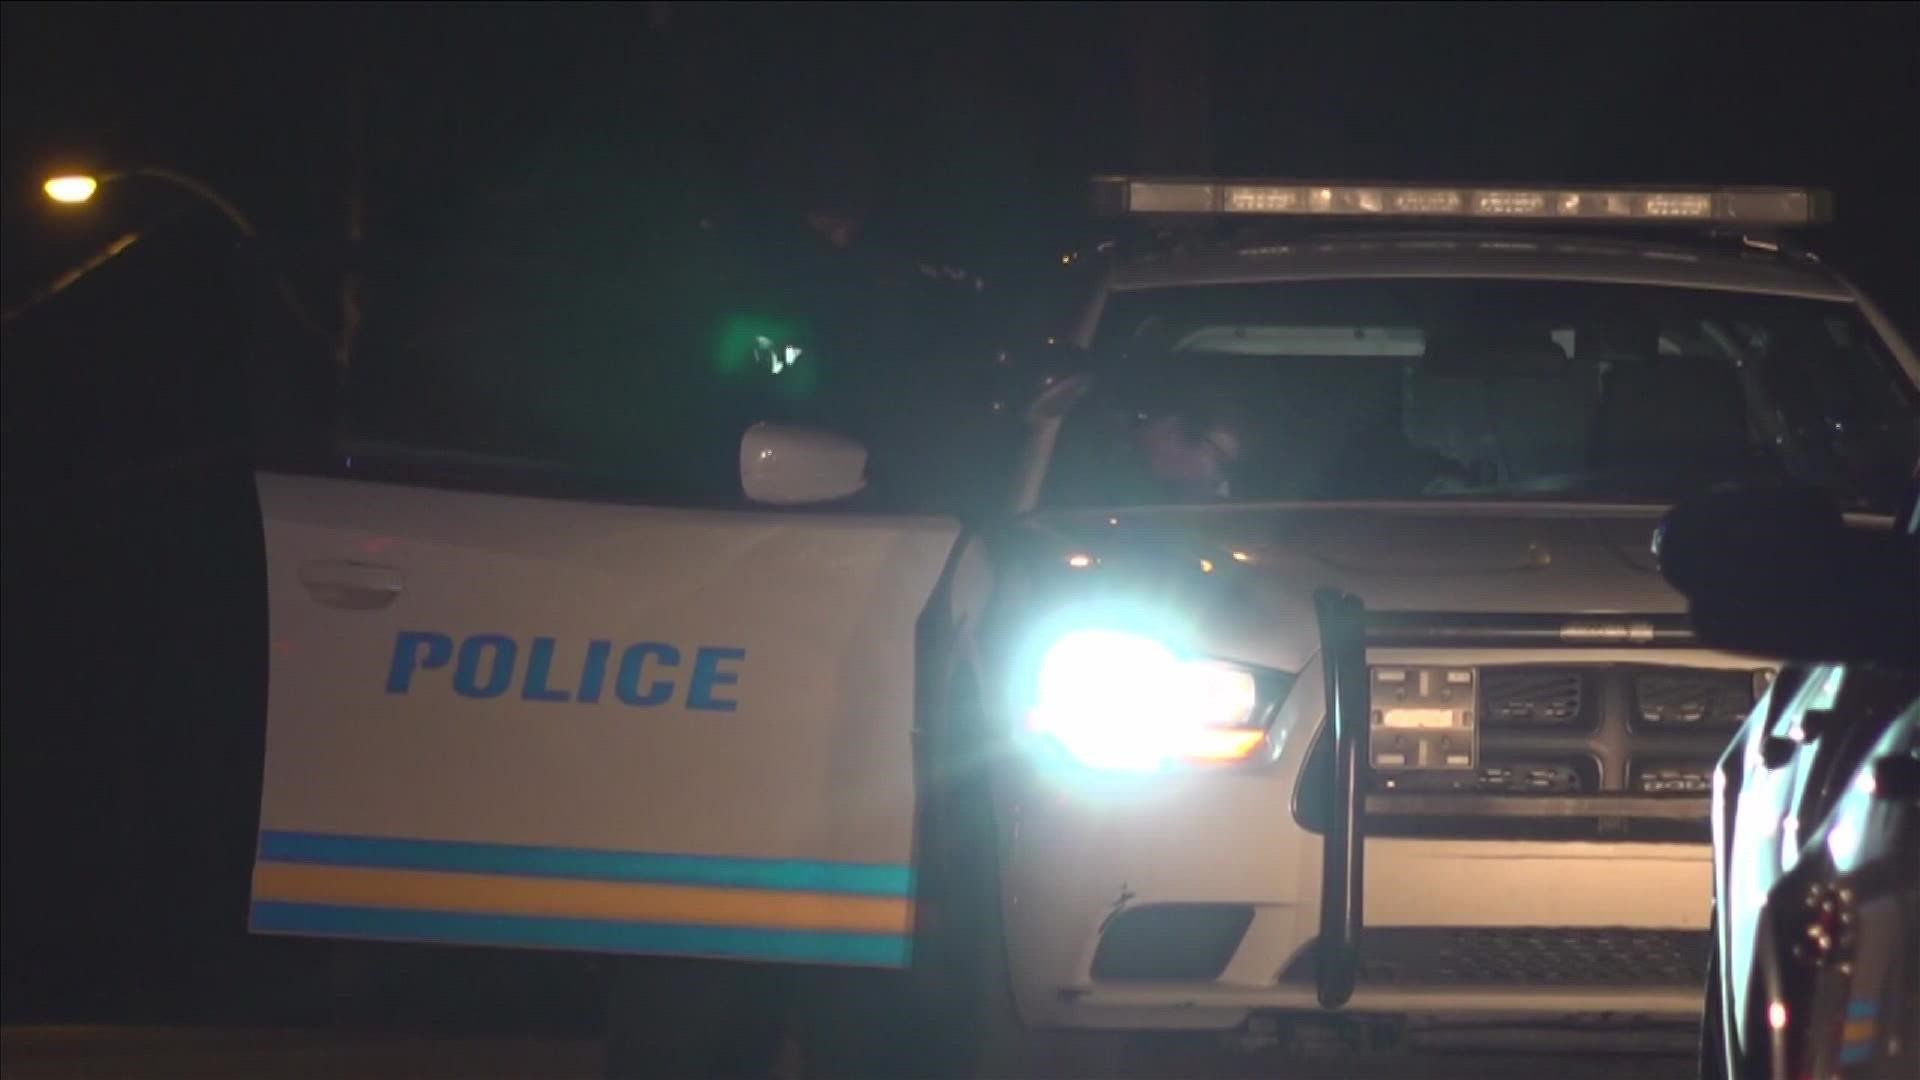 According to the Memphis Police Department, two 14-year-olds and a 16-year-old were arrested late Thursday night for leading police on a car chase in a stolen car.